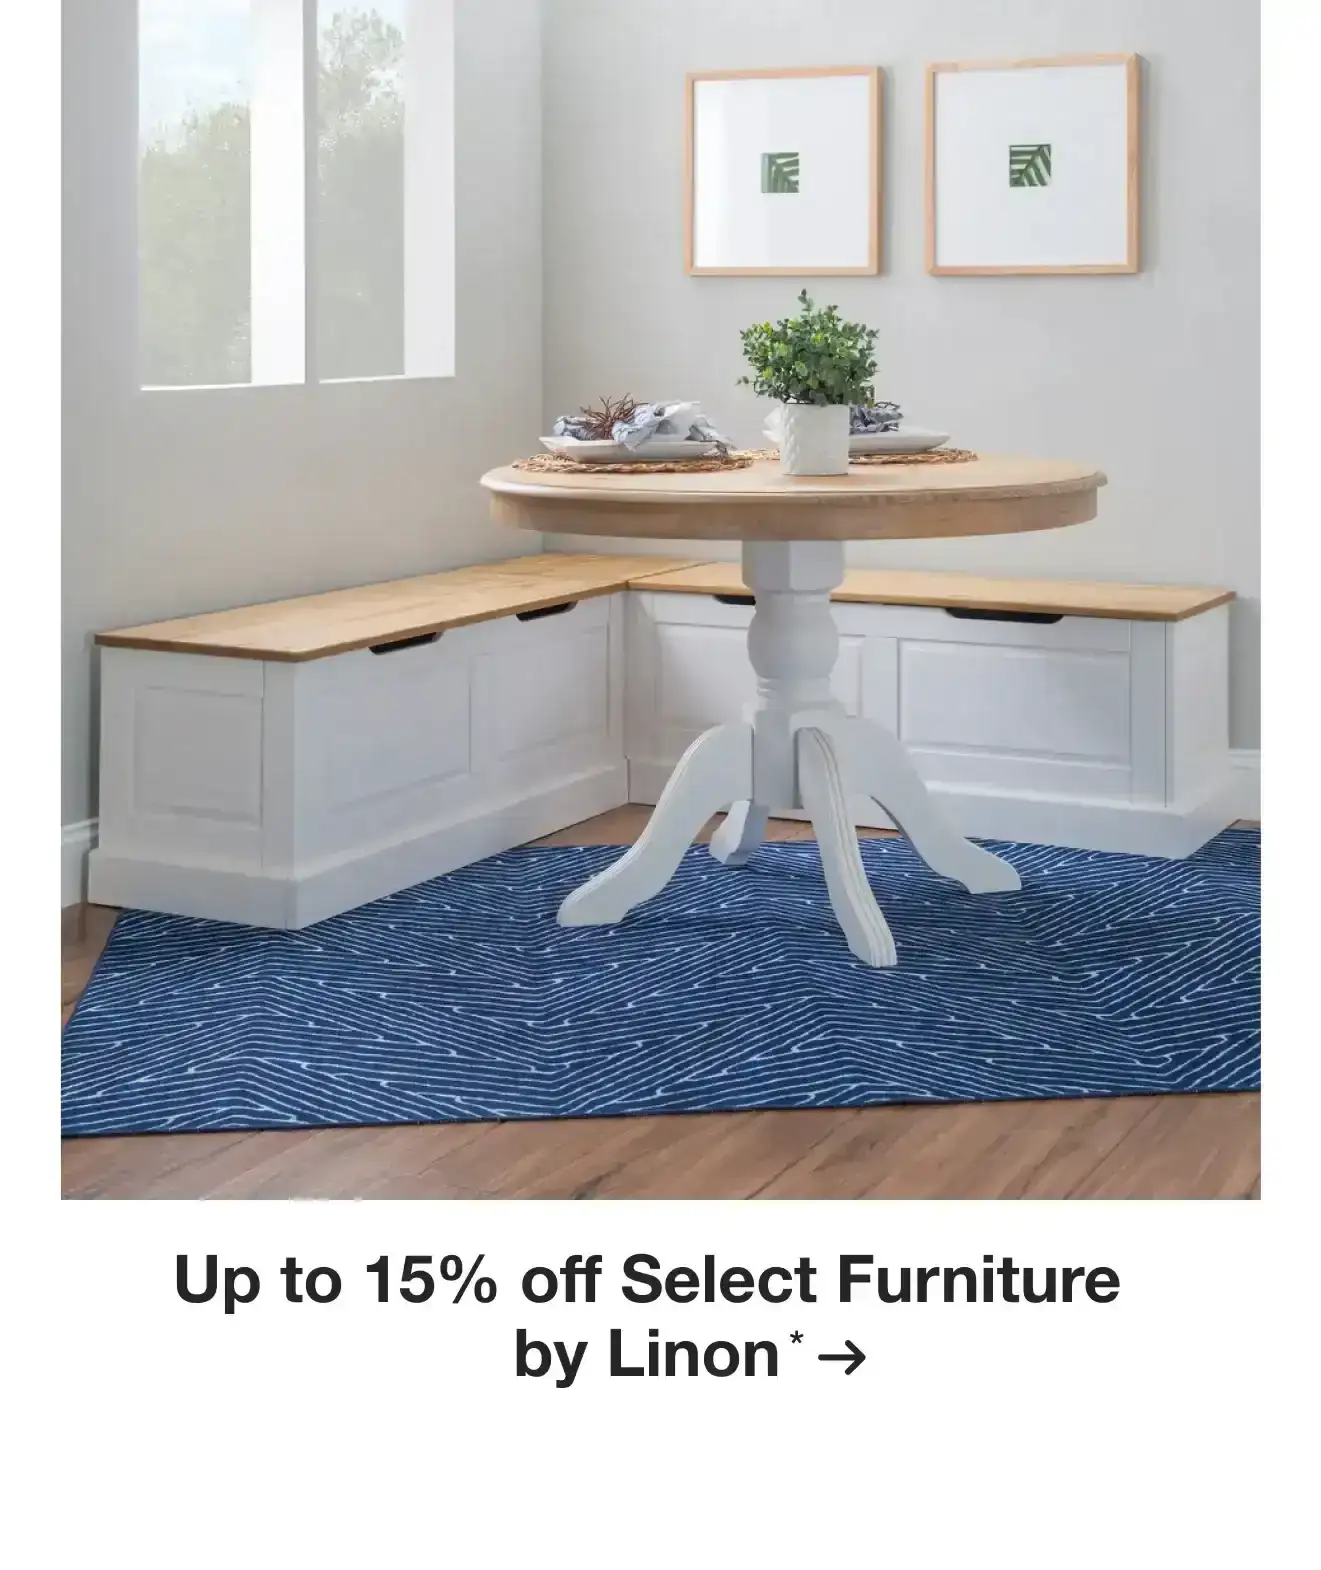 Up to 15% off Select Furniture by Linon*